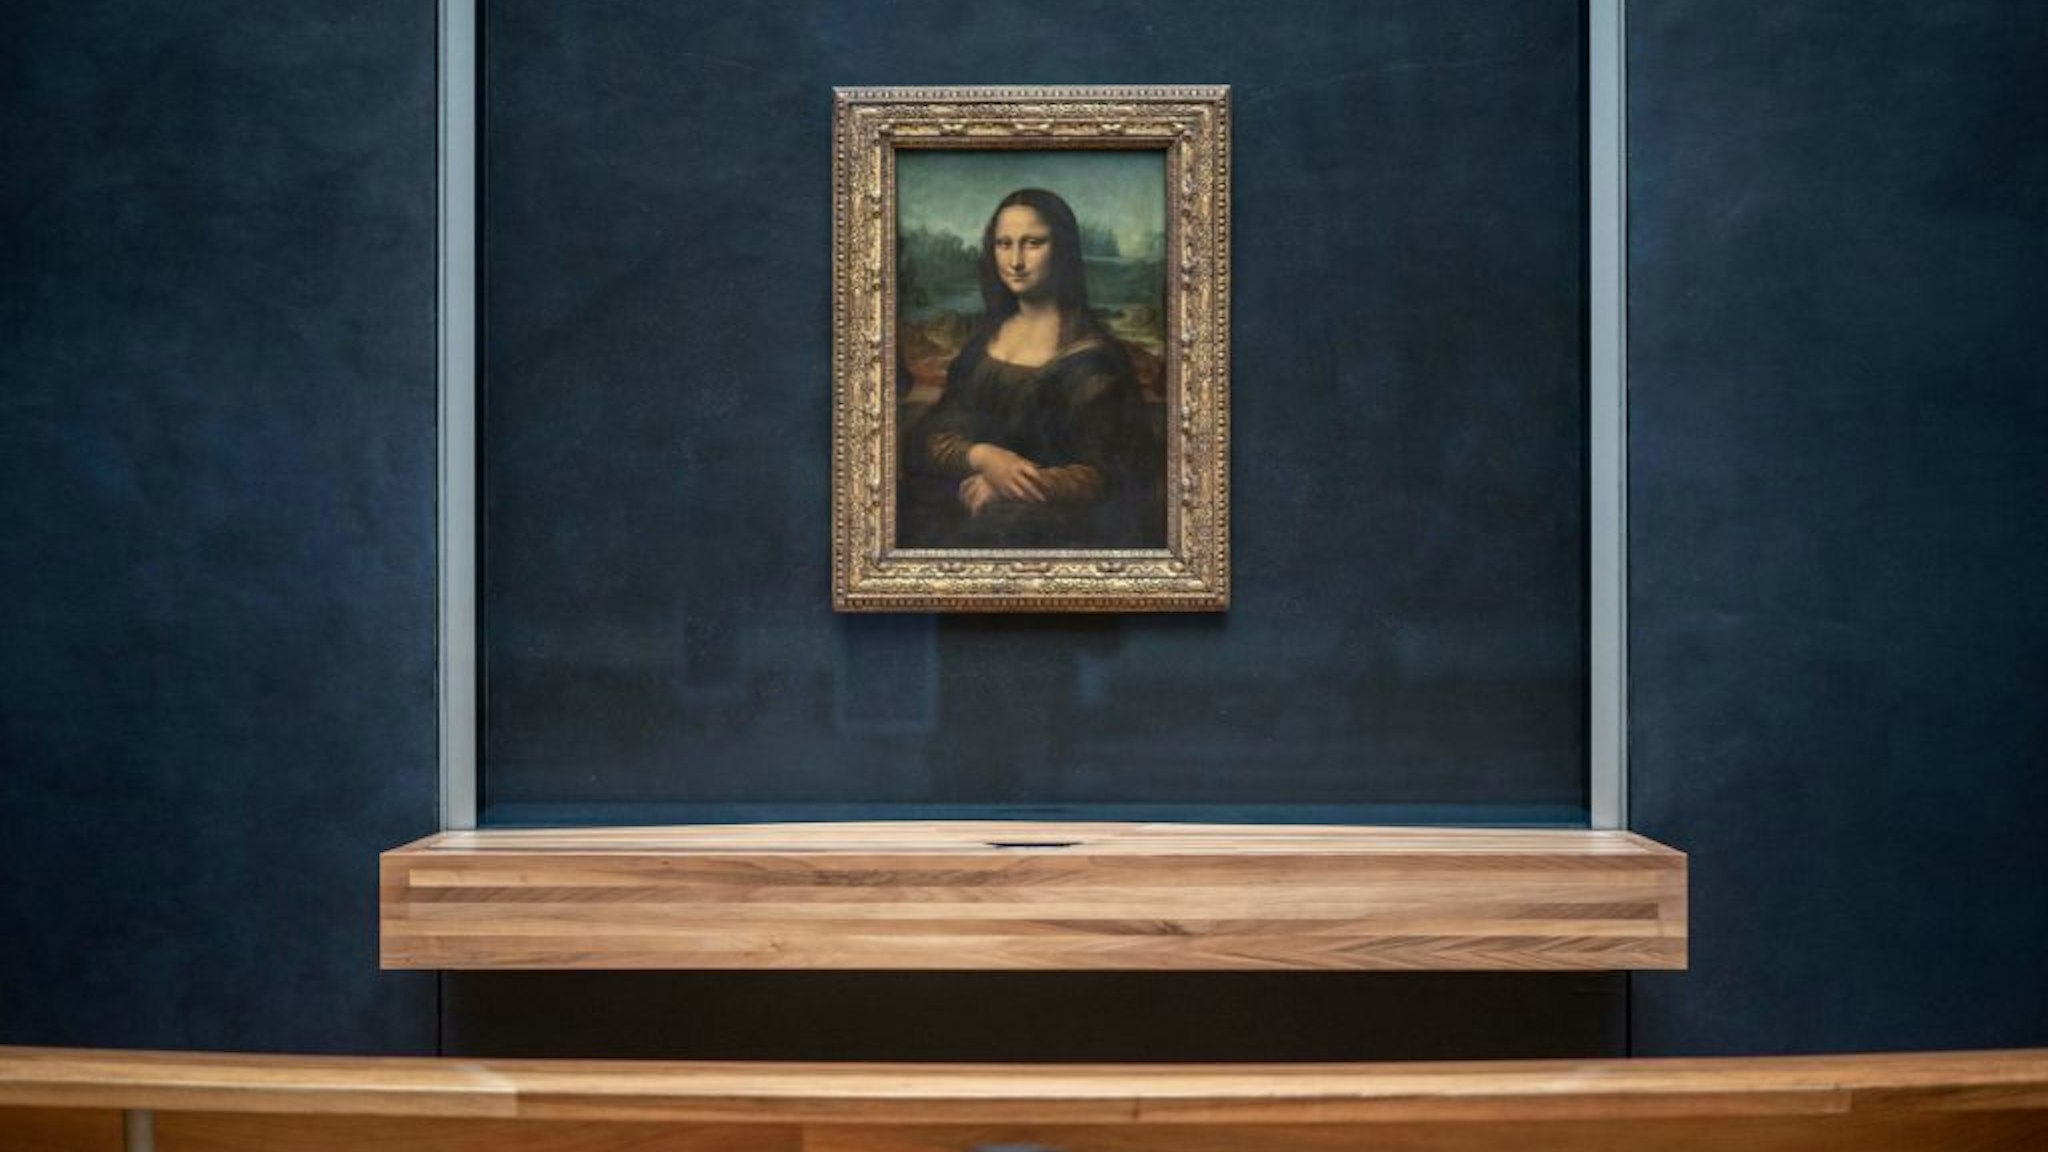 The portrait of Lisa Gherardini, wife of Francesco del Giocondo, known as the Mona Lisa or La Gioconda (La Joconde in French), painted by Italian artsist Leonardo da Vinci, is displayed in the empty "Salle des Etats" of the Louvre Museum in Paris, on January 8, 2021. - The Louvre, which remains closed due to the sanitory situation, suffered the full impact of the Covid-19 pandemic in 2020, suffering a drop in attendance of 72% compared to 2019, and a loss of revenue of more than 90 million euros, the museum announced on January 8, 2021. (Photo by Martin BUREAU / AFP) (Photo by MARTIN BUREAU/AFP via Getty Images)